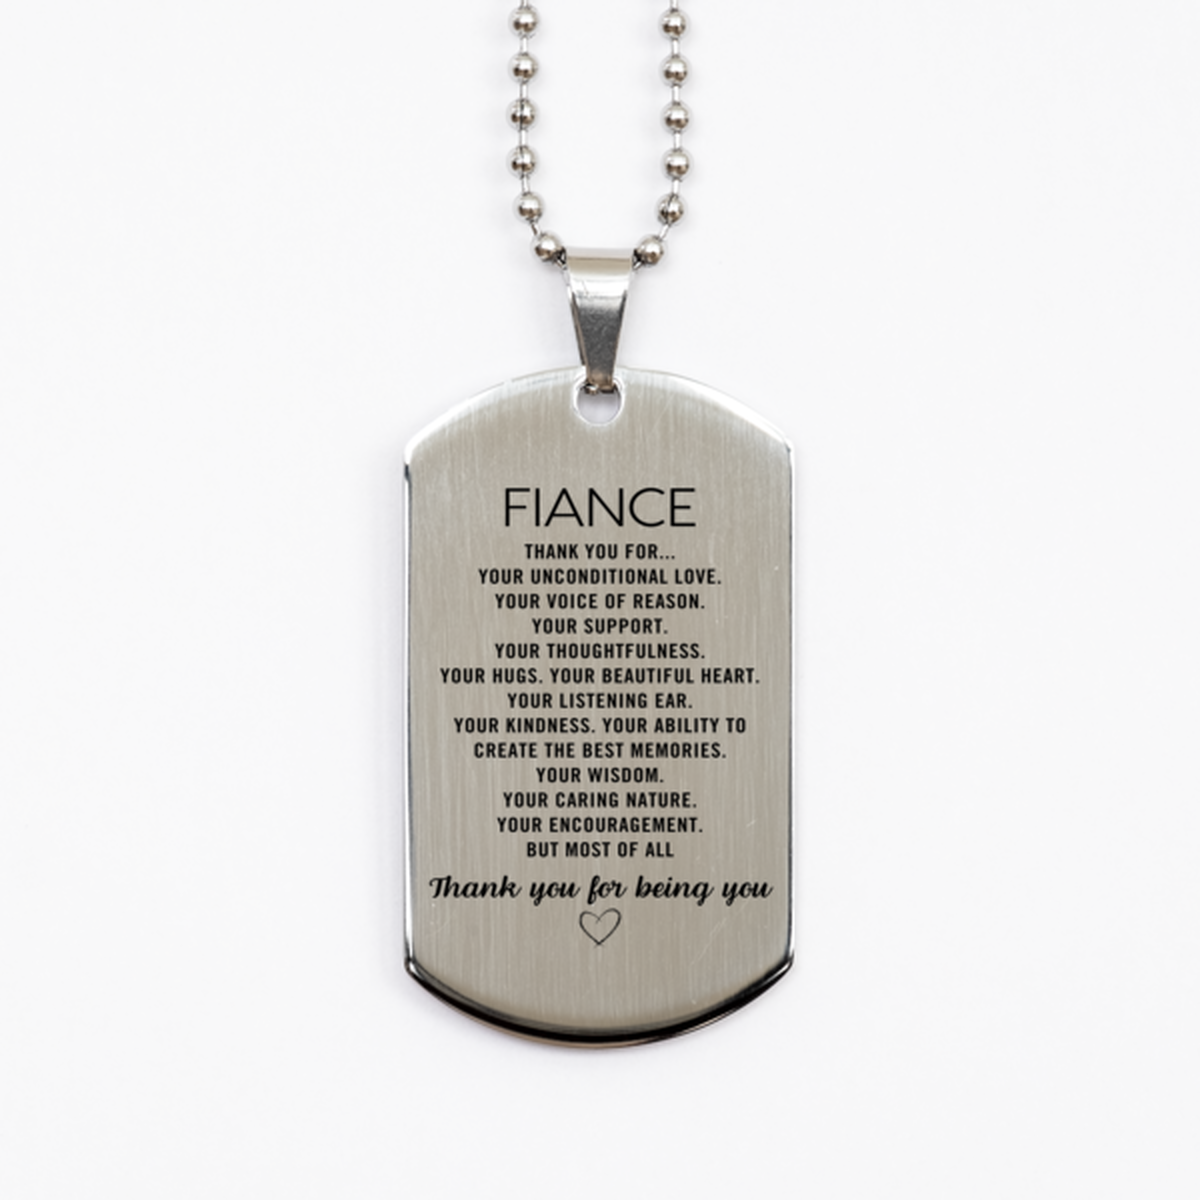 Fiance Silver Dog Tag Custom, Engraved Gifts For Fiance Christmas Graduation Birthday Gifts for Men Women Fiance Thank you for Your unconditional love